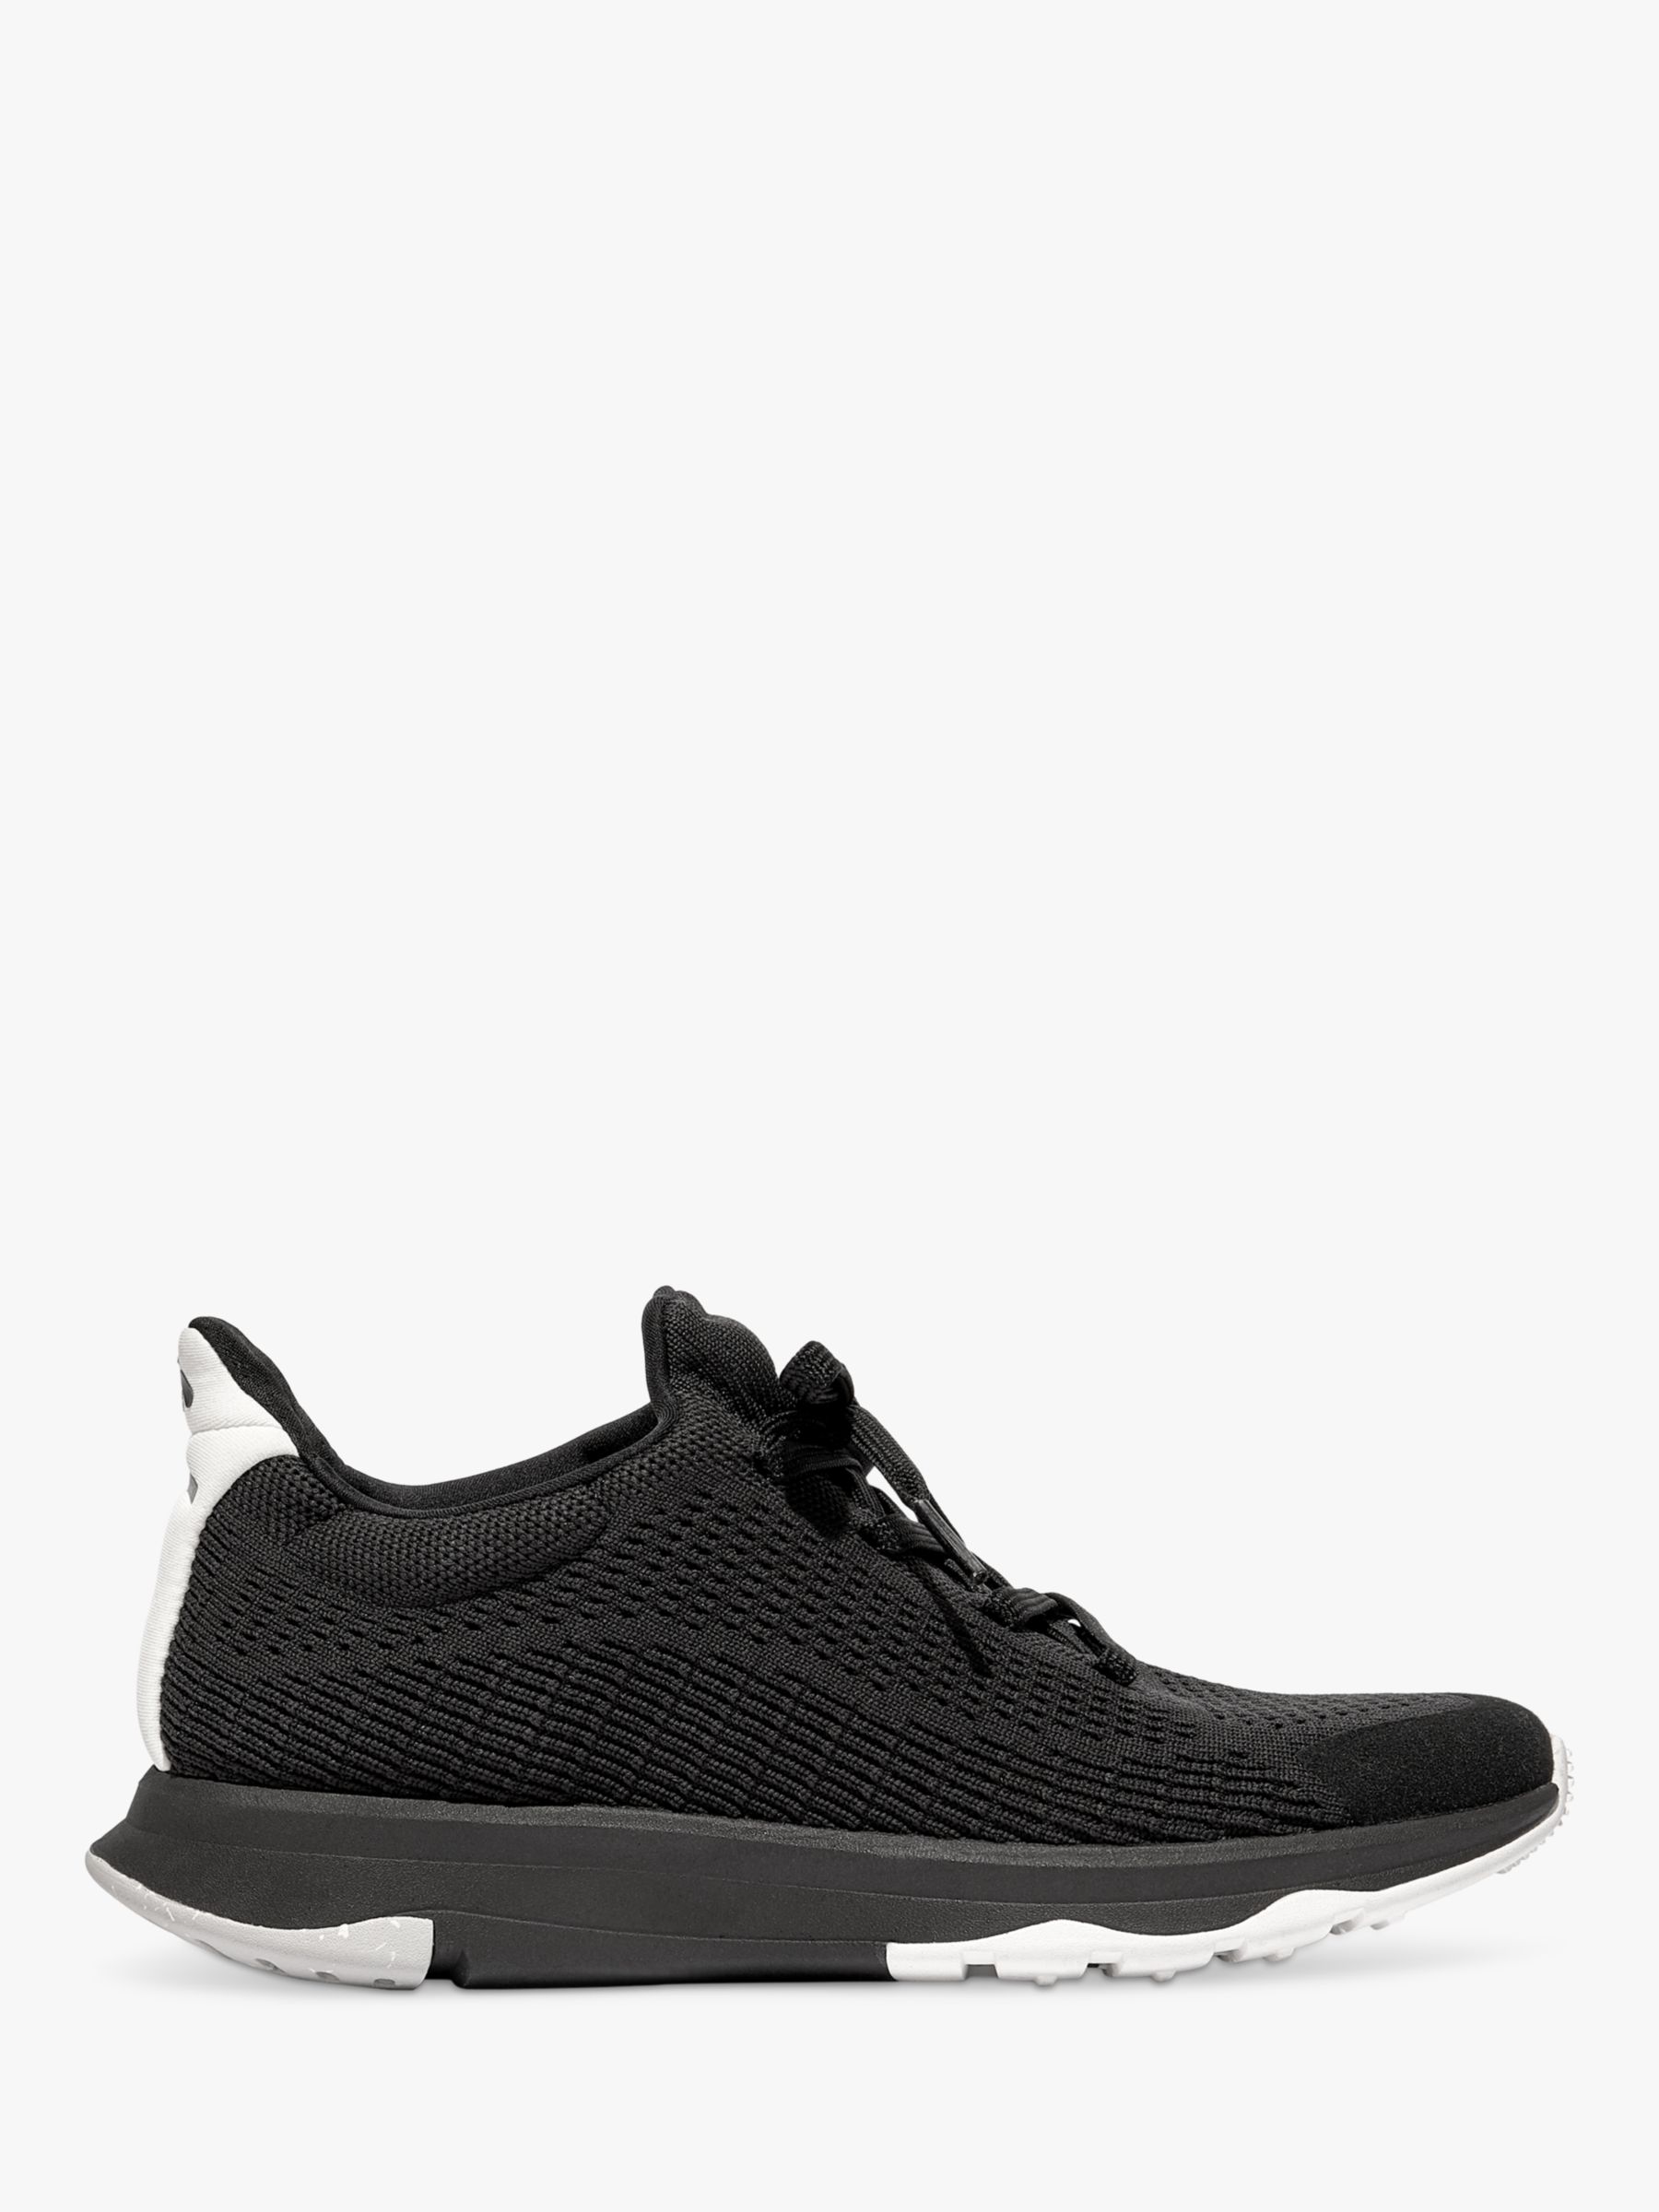 FitFlop Vitamin FFX E01 Lace Up Trainers, Black at John Lewis & Partners